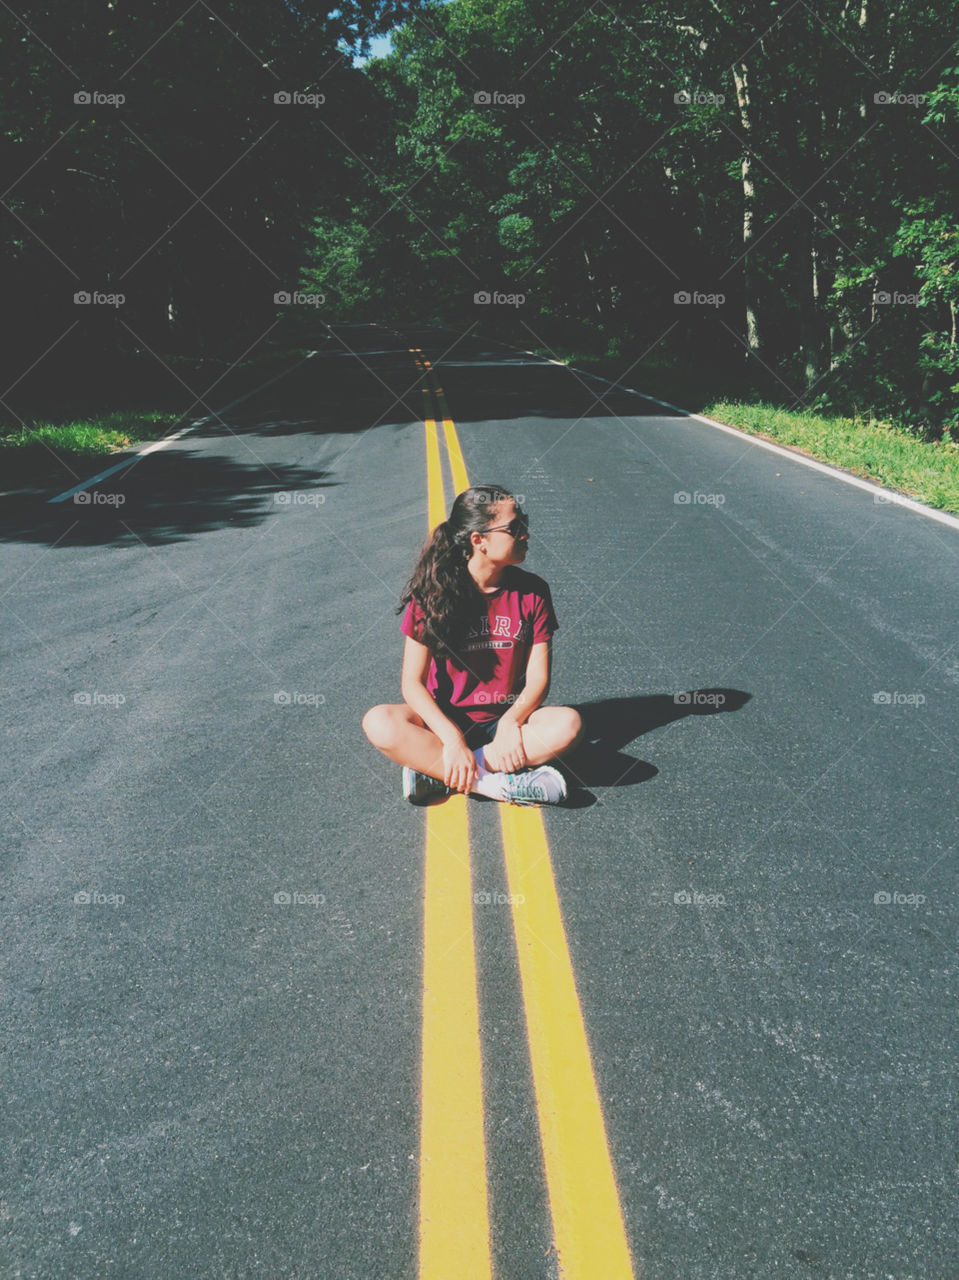 Sitting in the middle of the road